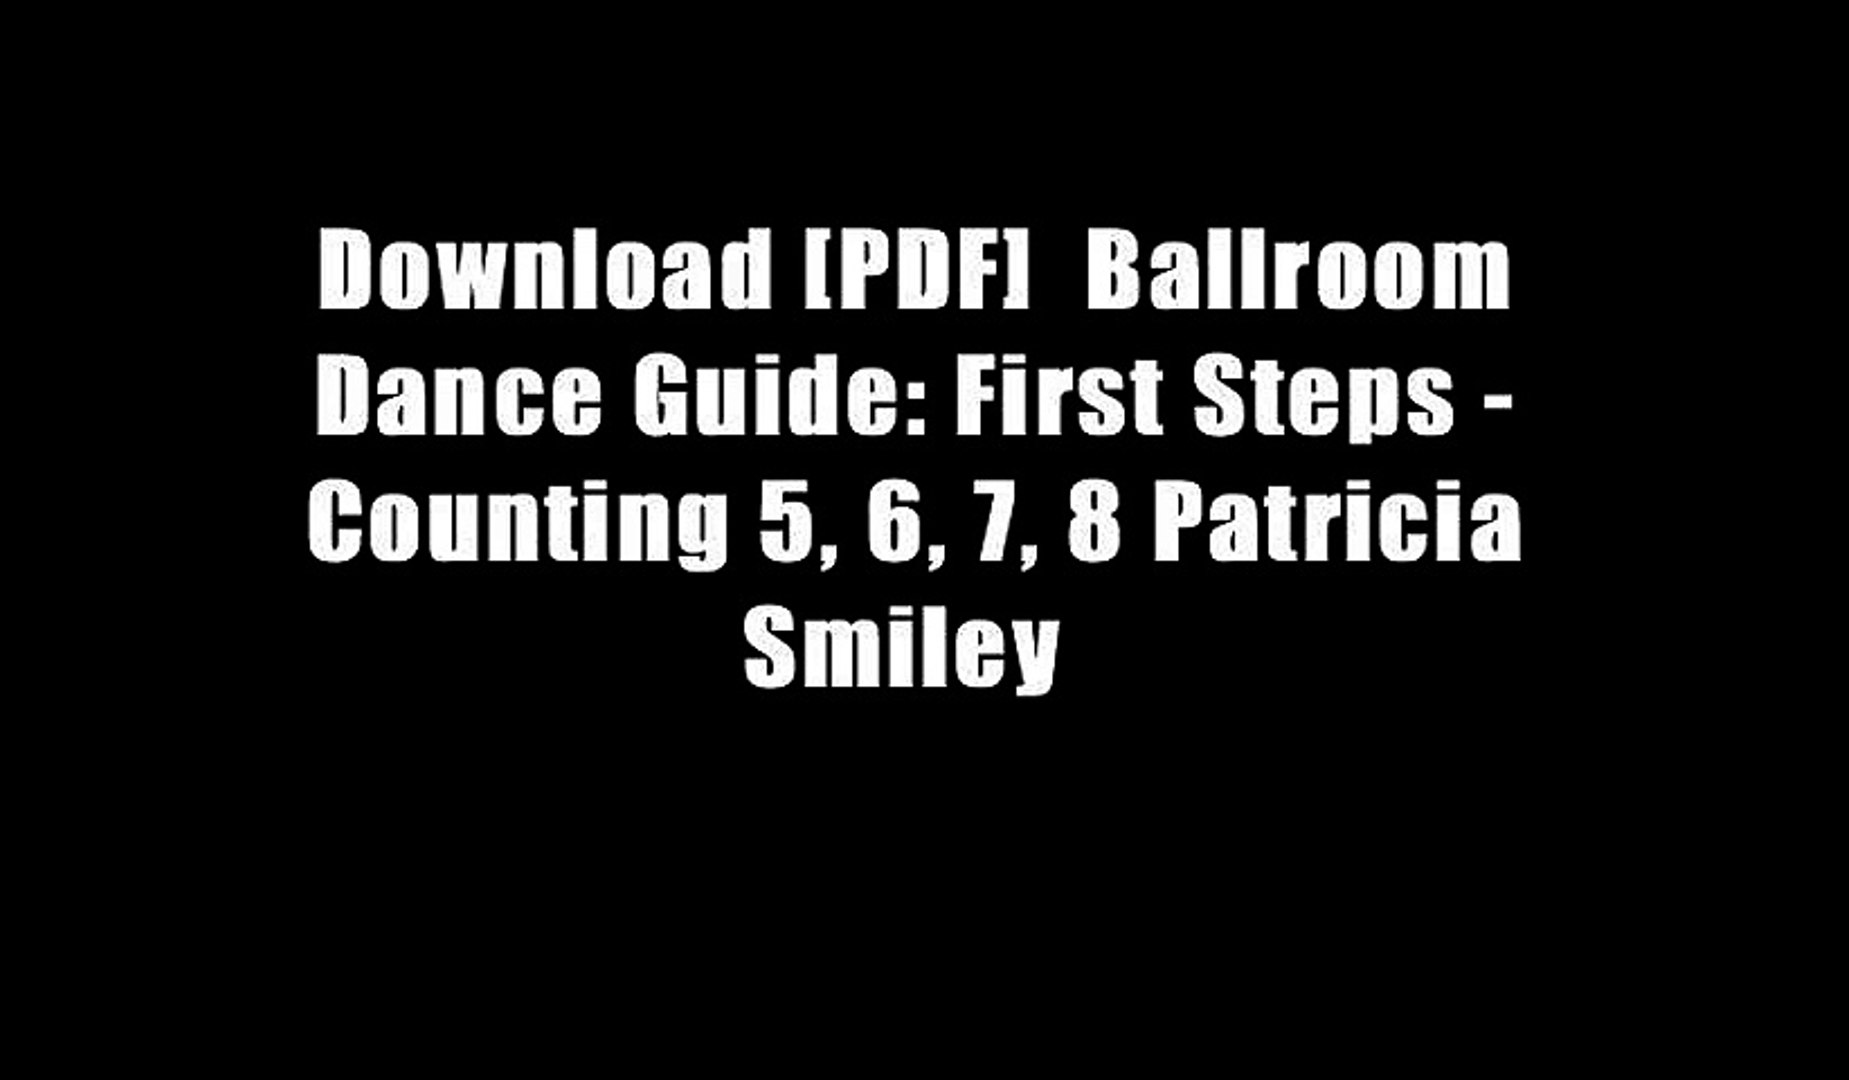 Download Pdf Ballroom Dance Guide First Steps Counting 5 6 7 8 Patricia Smiley Video Dailymotion